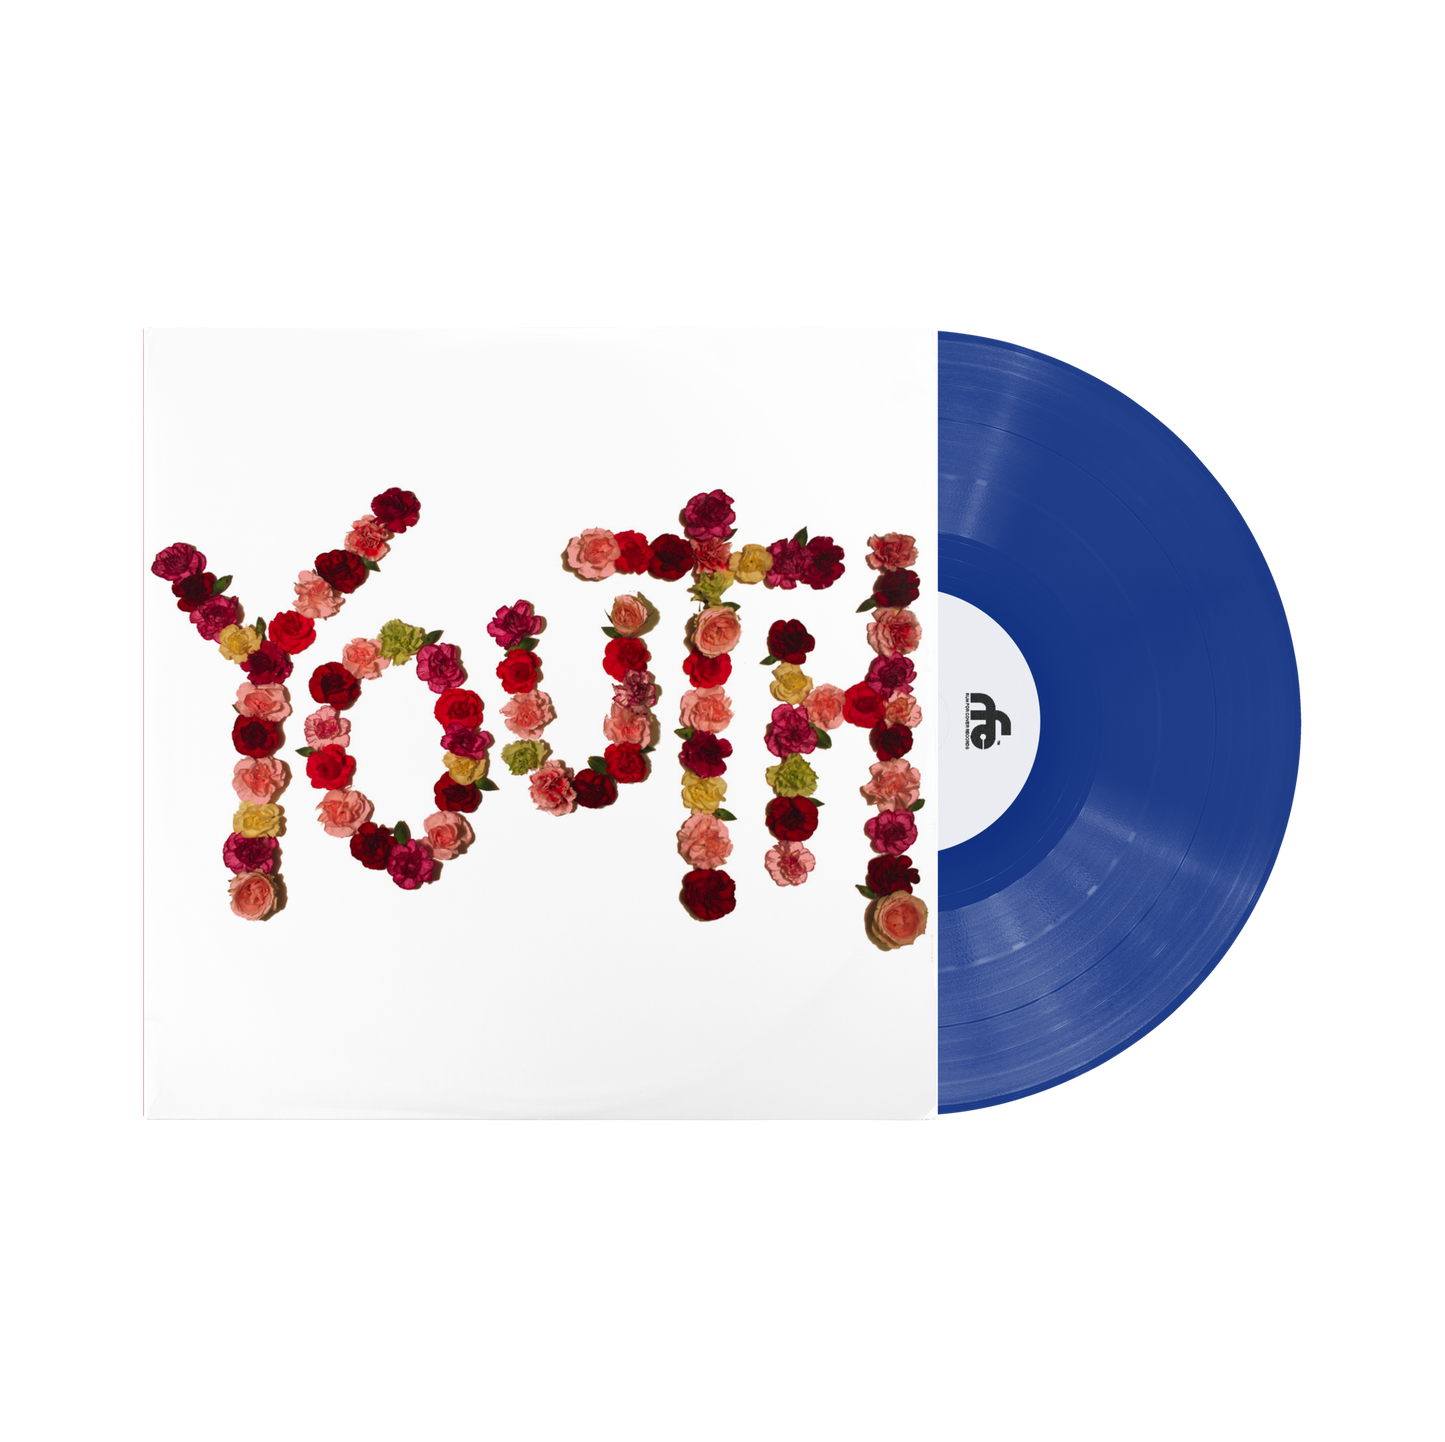 Citizen  "Youth (10 Year Anniversary Edition)" LP